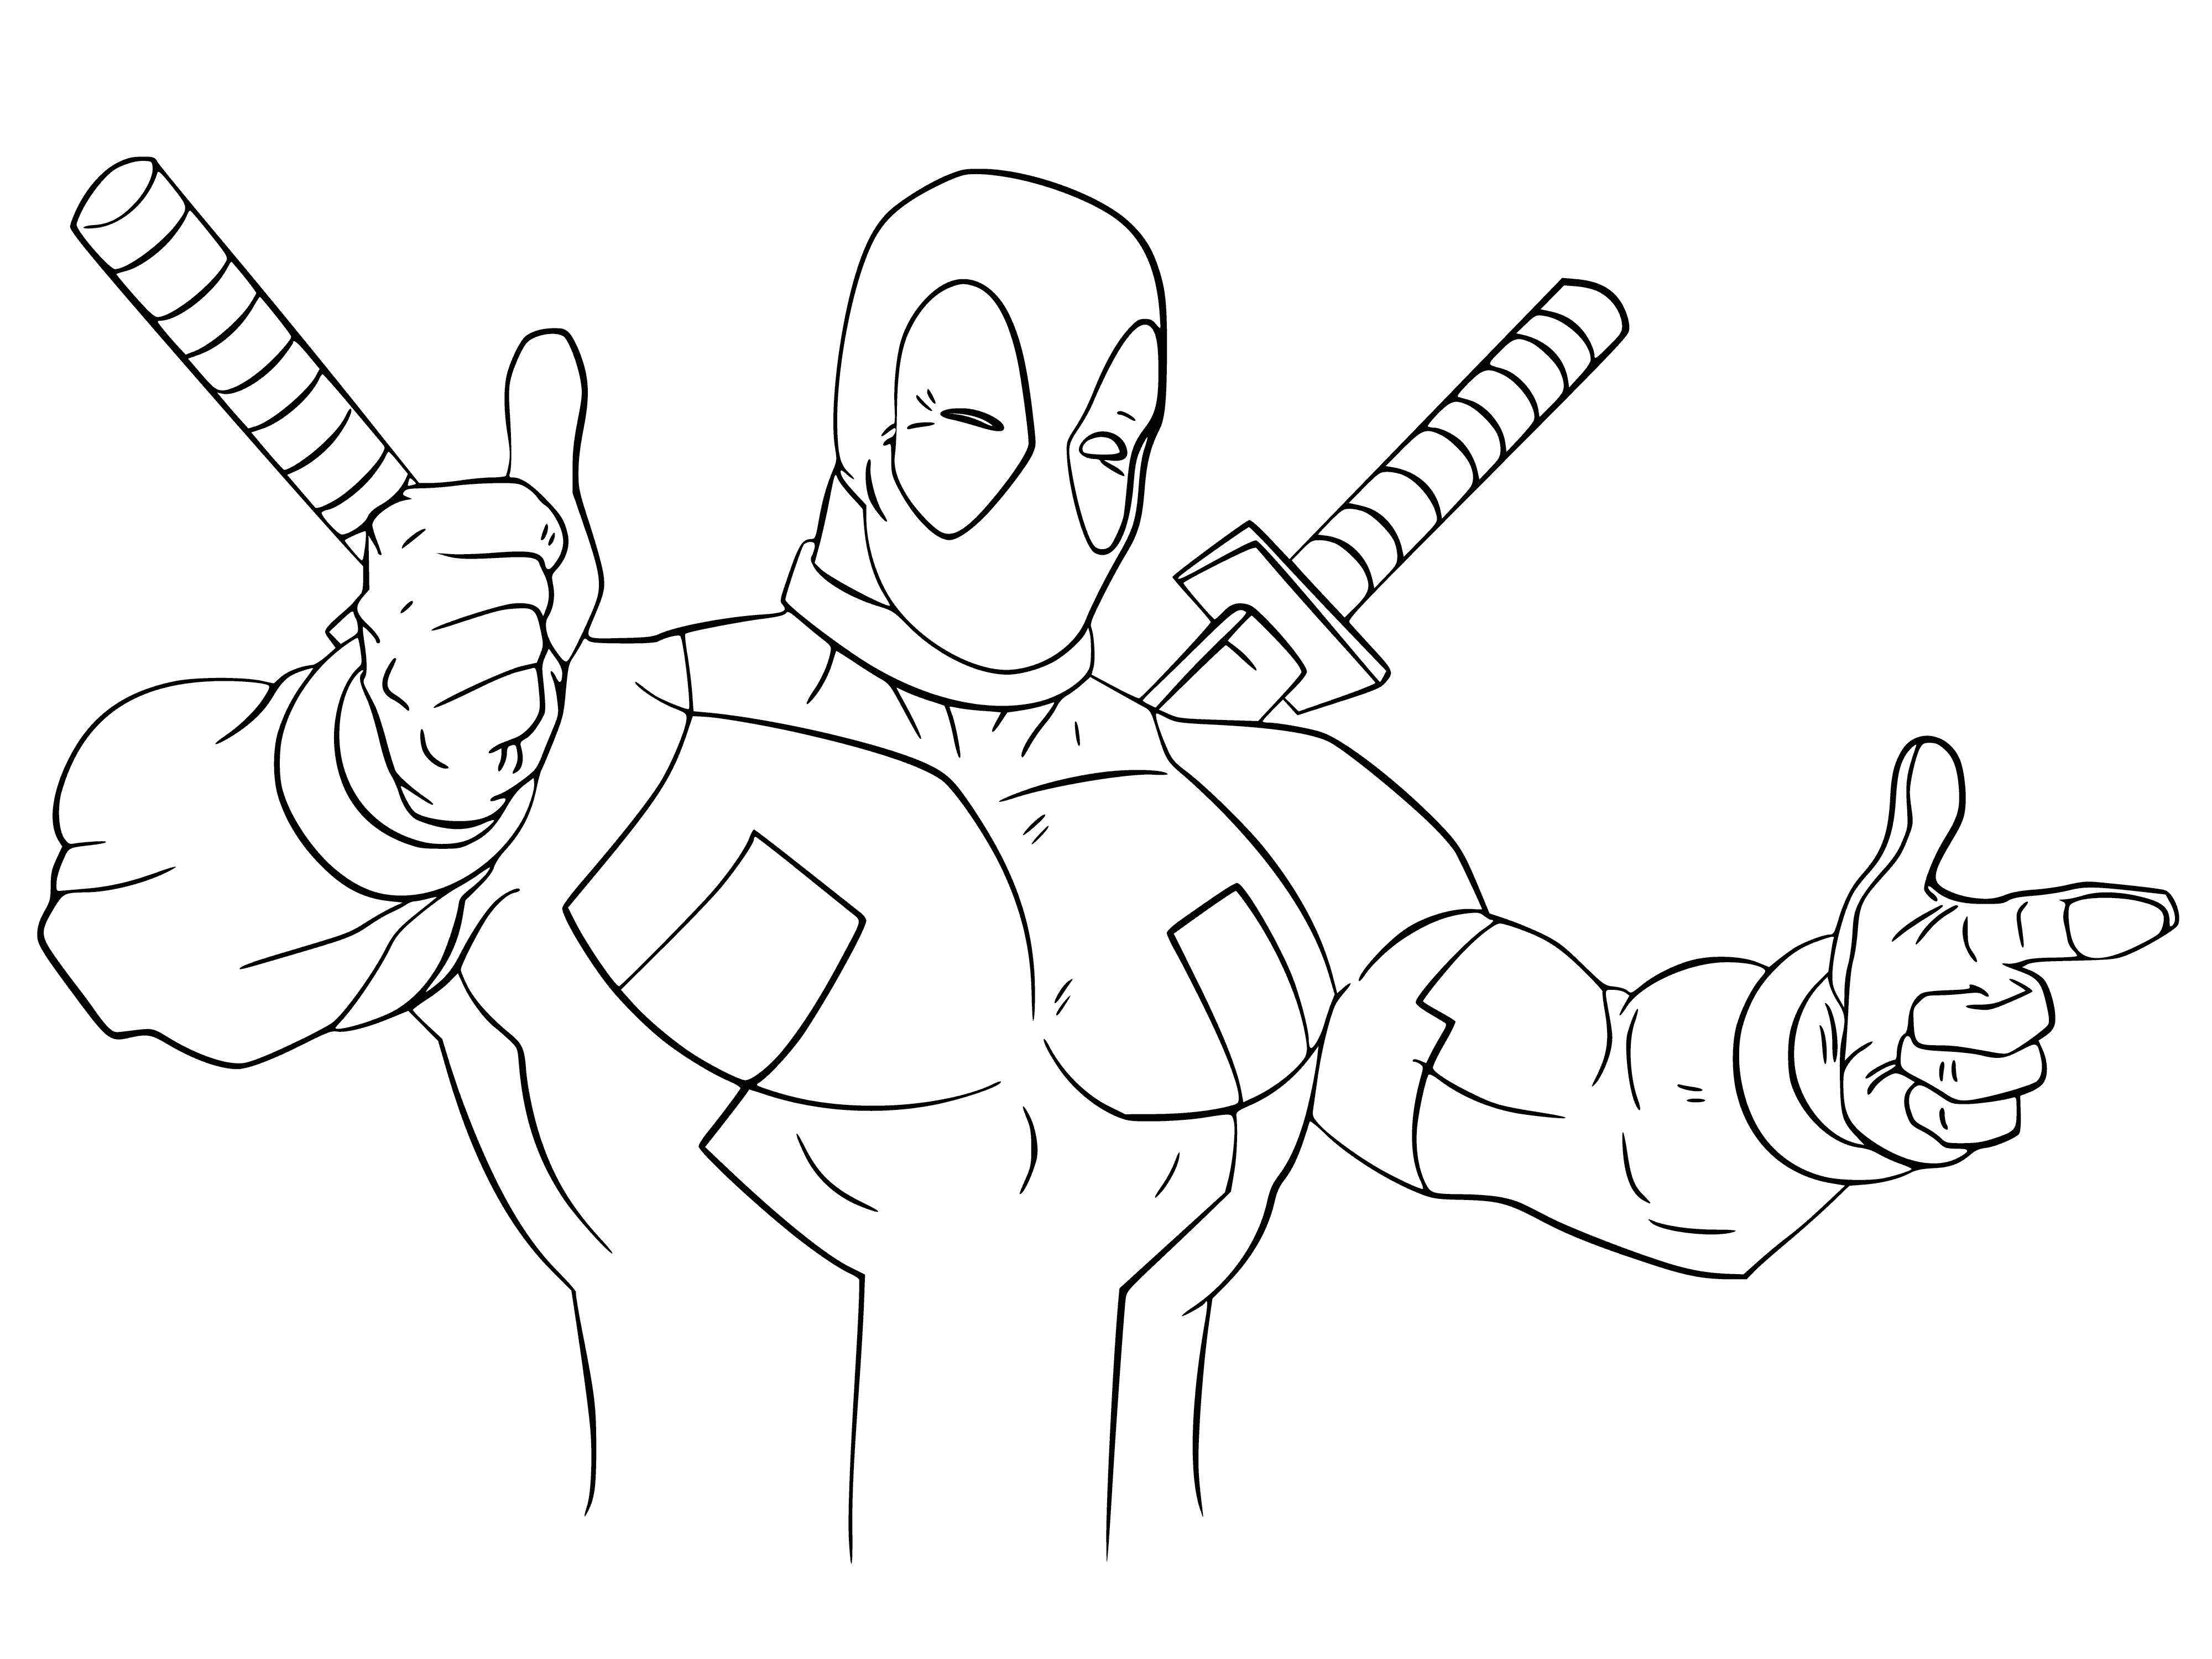 coloring page: Deadpool: Marvel anti-hero, mercenary, healing factor, known for jokes and breaking the 4th wall.